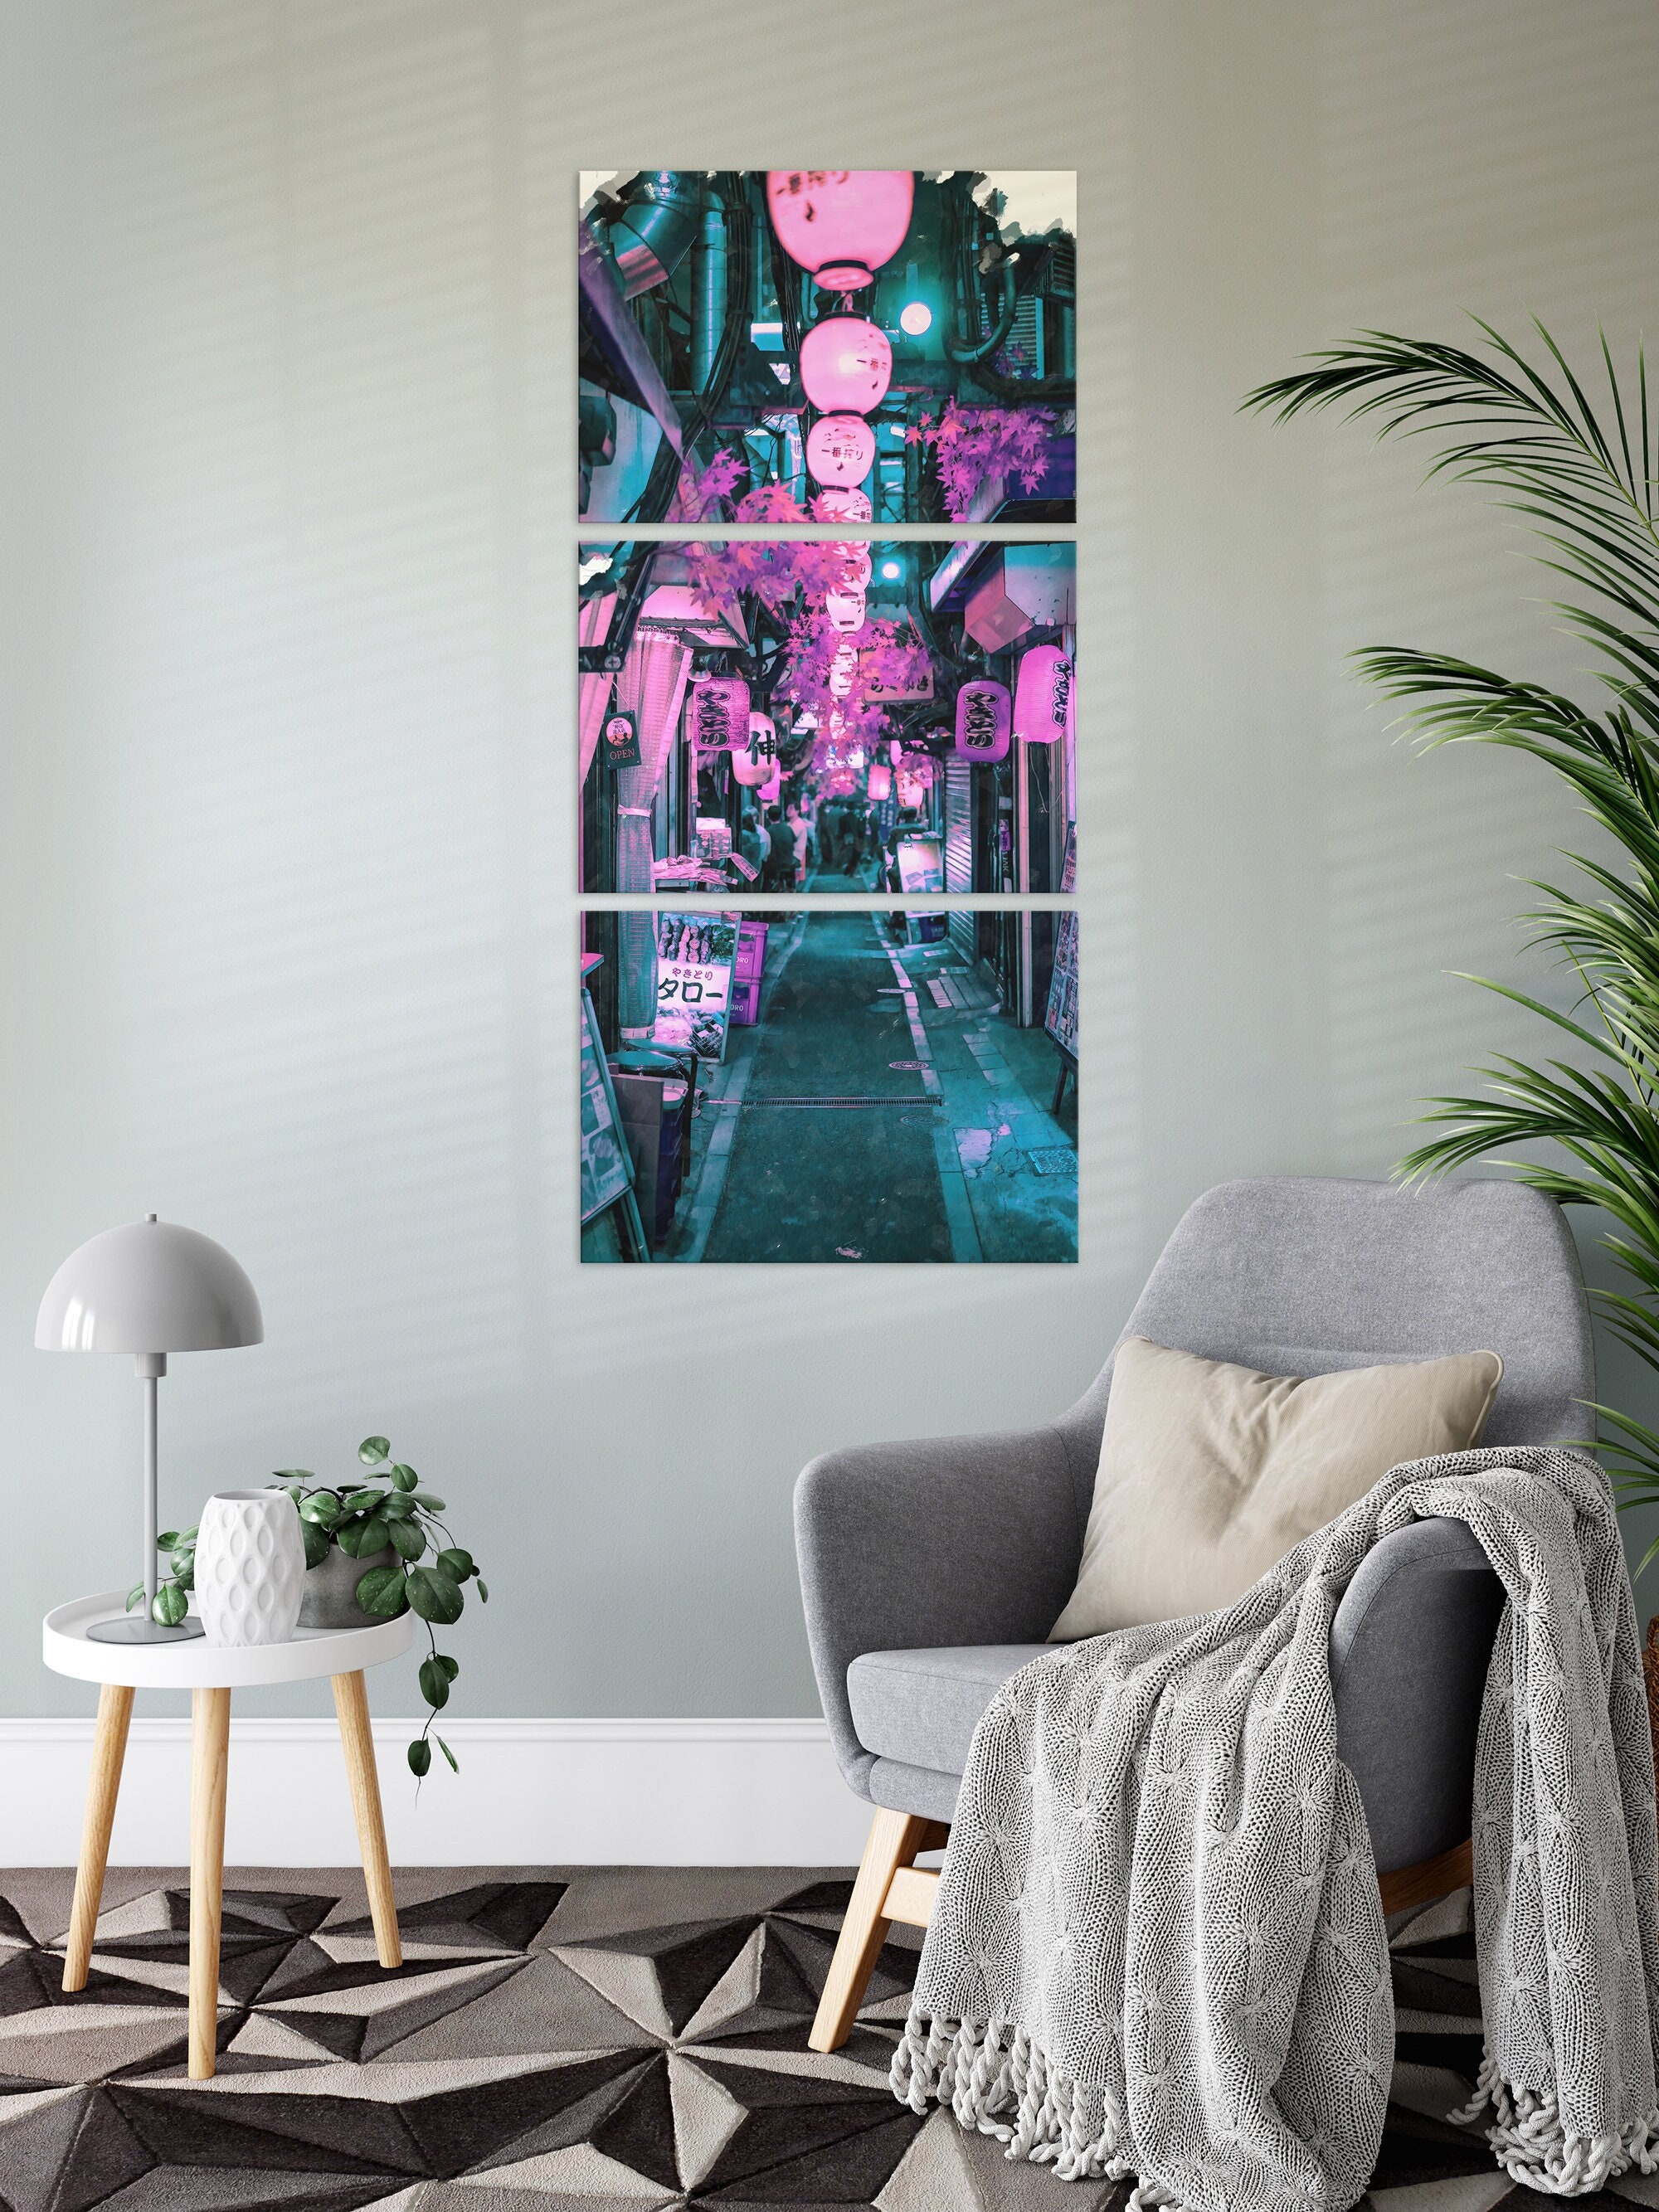 Lucy Edgerunners' Poster, picture, metal print, paint by Cyberpunk 2077, Displate